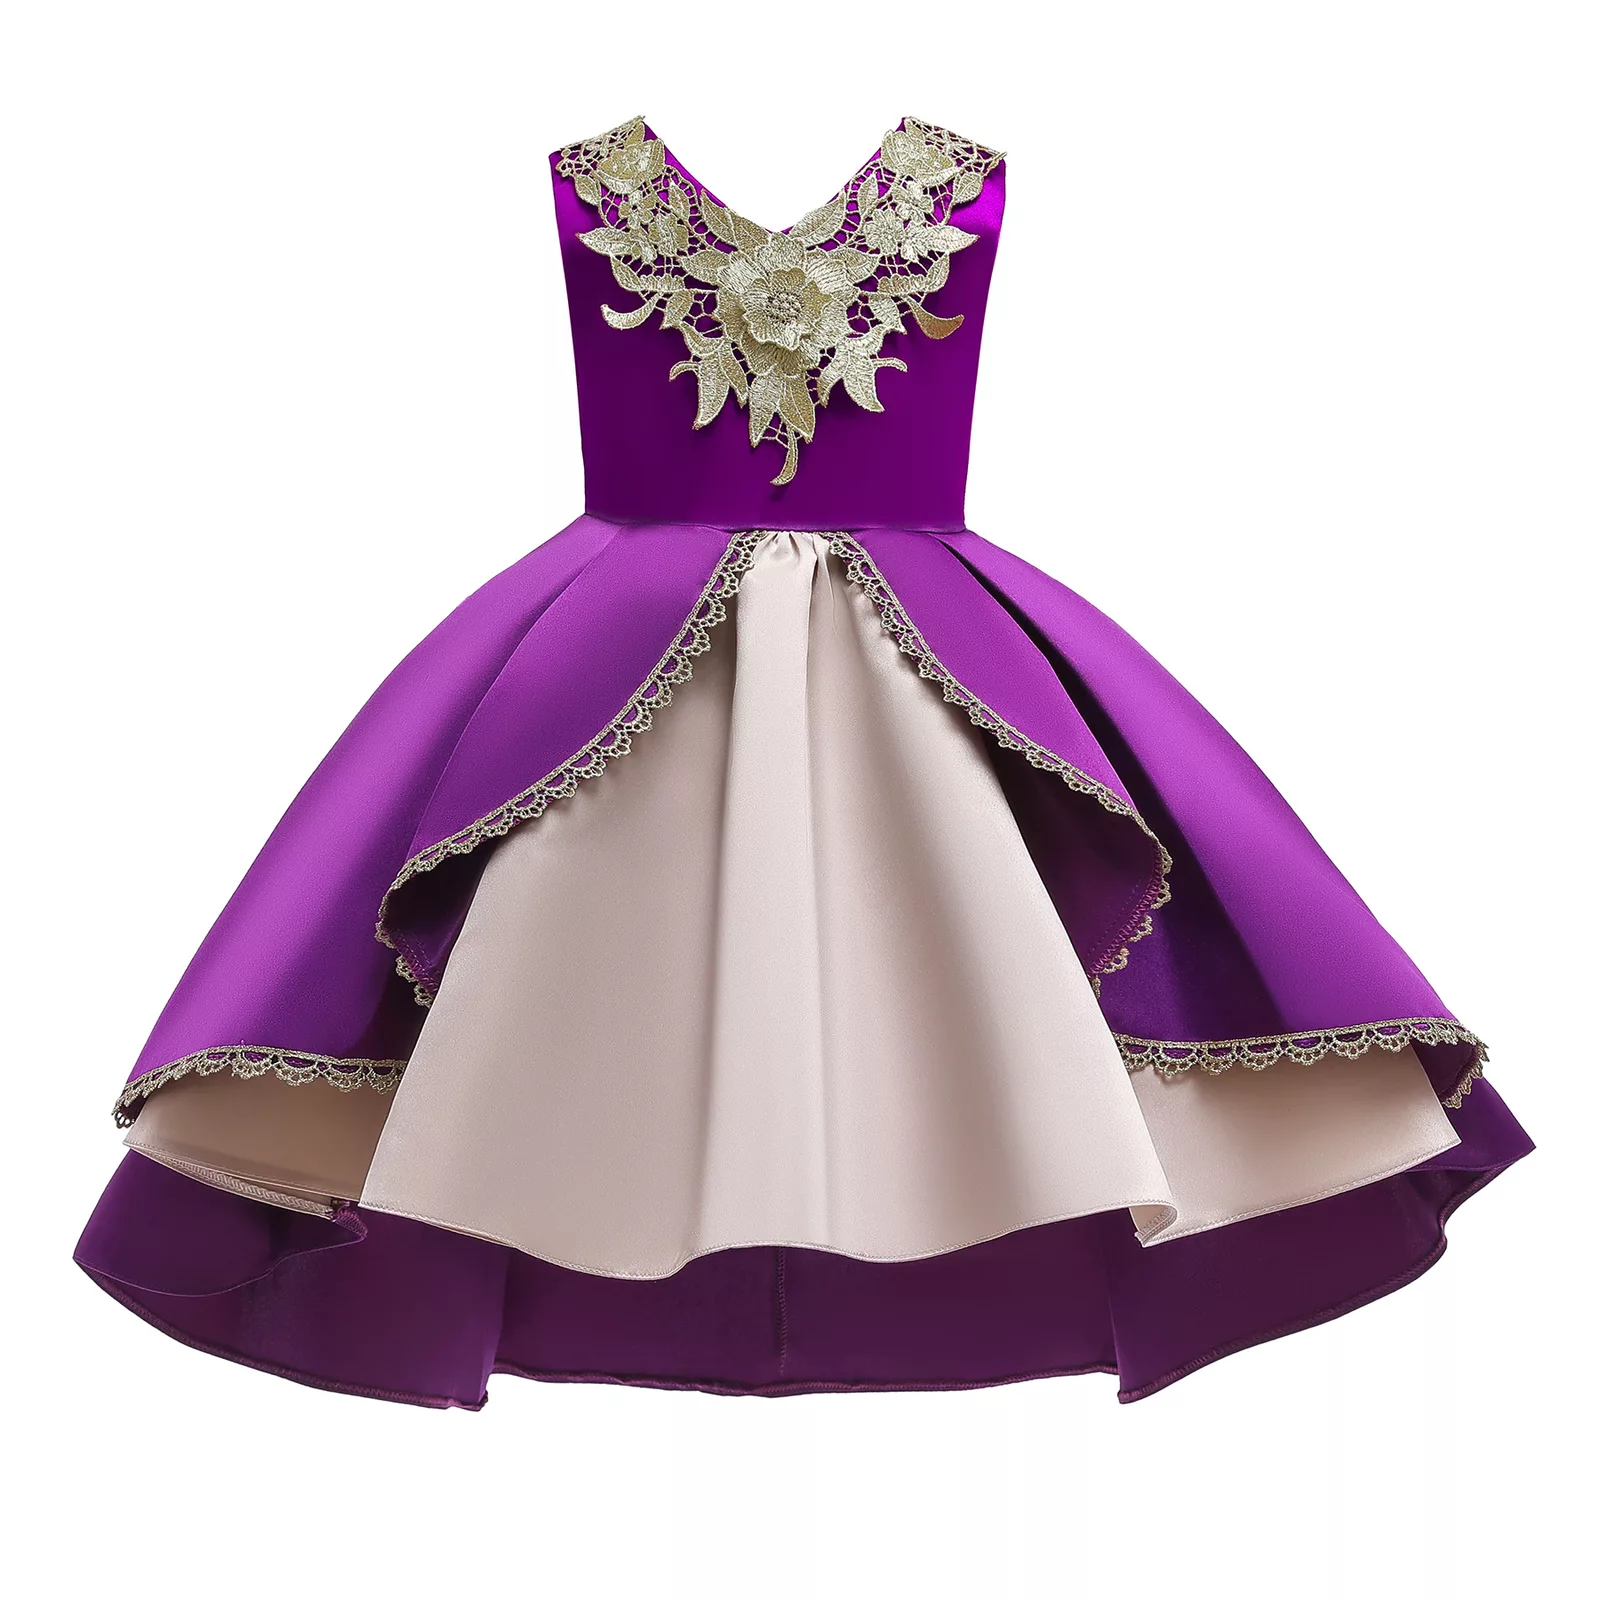 Princess dresses for girls: How to choose the right one? – Mothers And  Babies